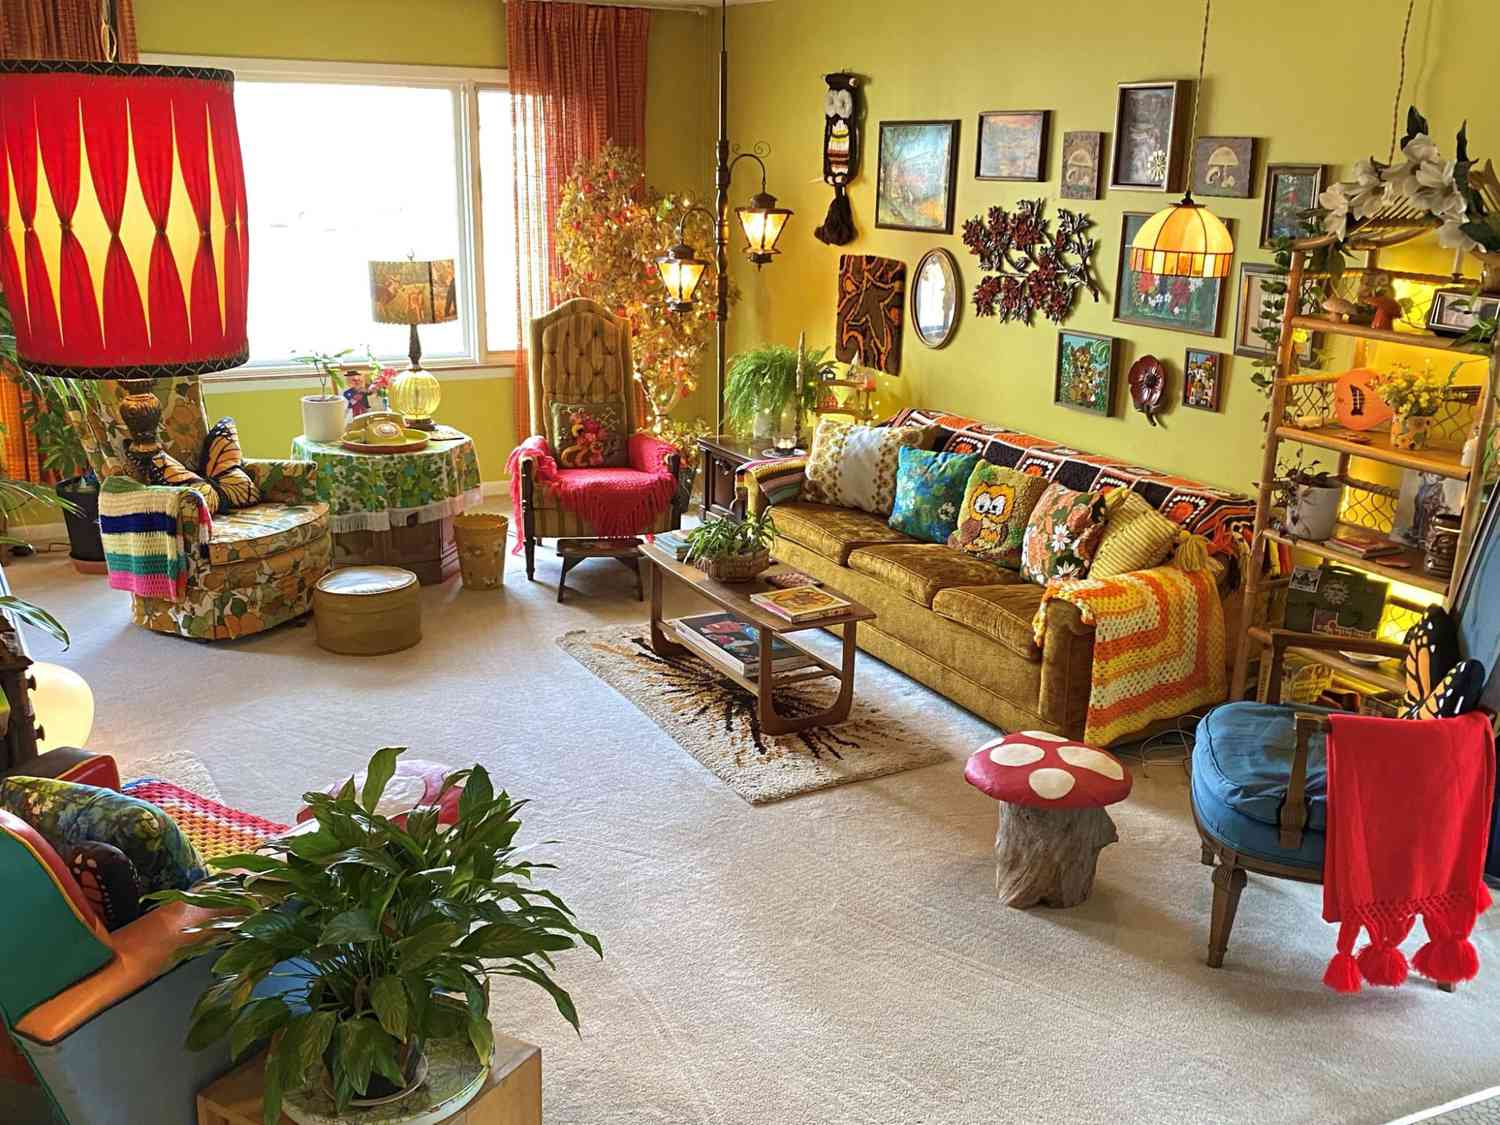 Chicago Mom Transforms Home Into 1970s Time Capsule Using Thrifted Finds Under $25 — See Inside!